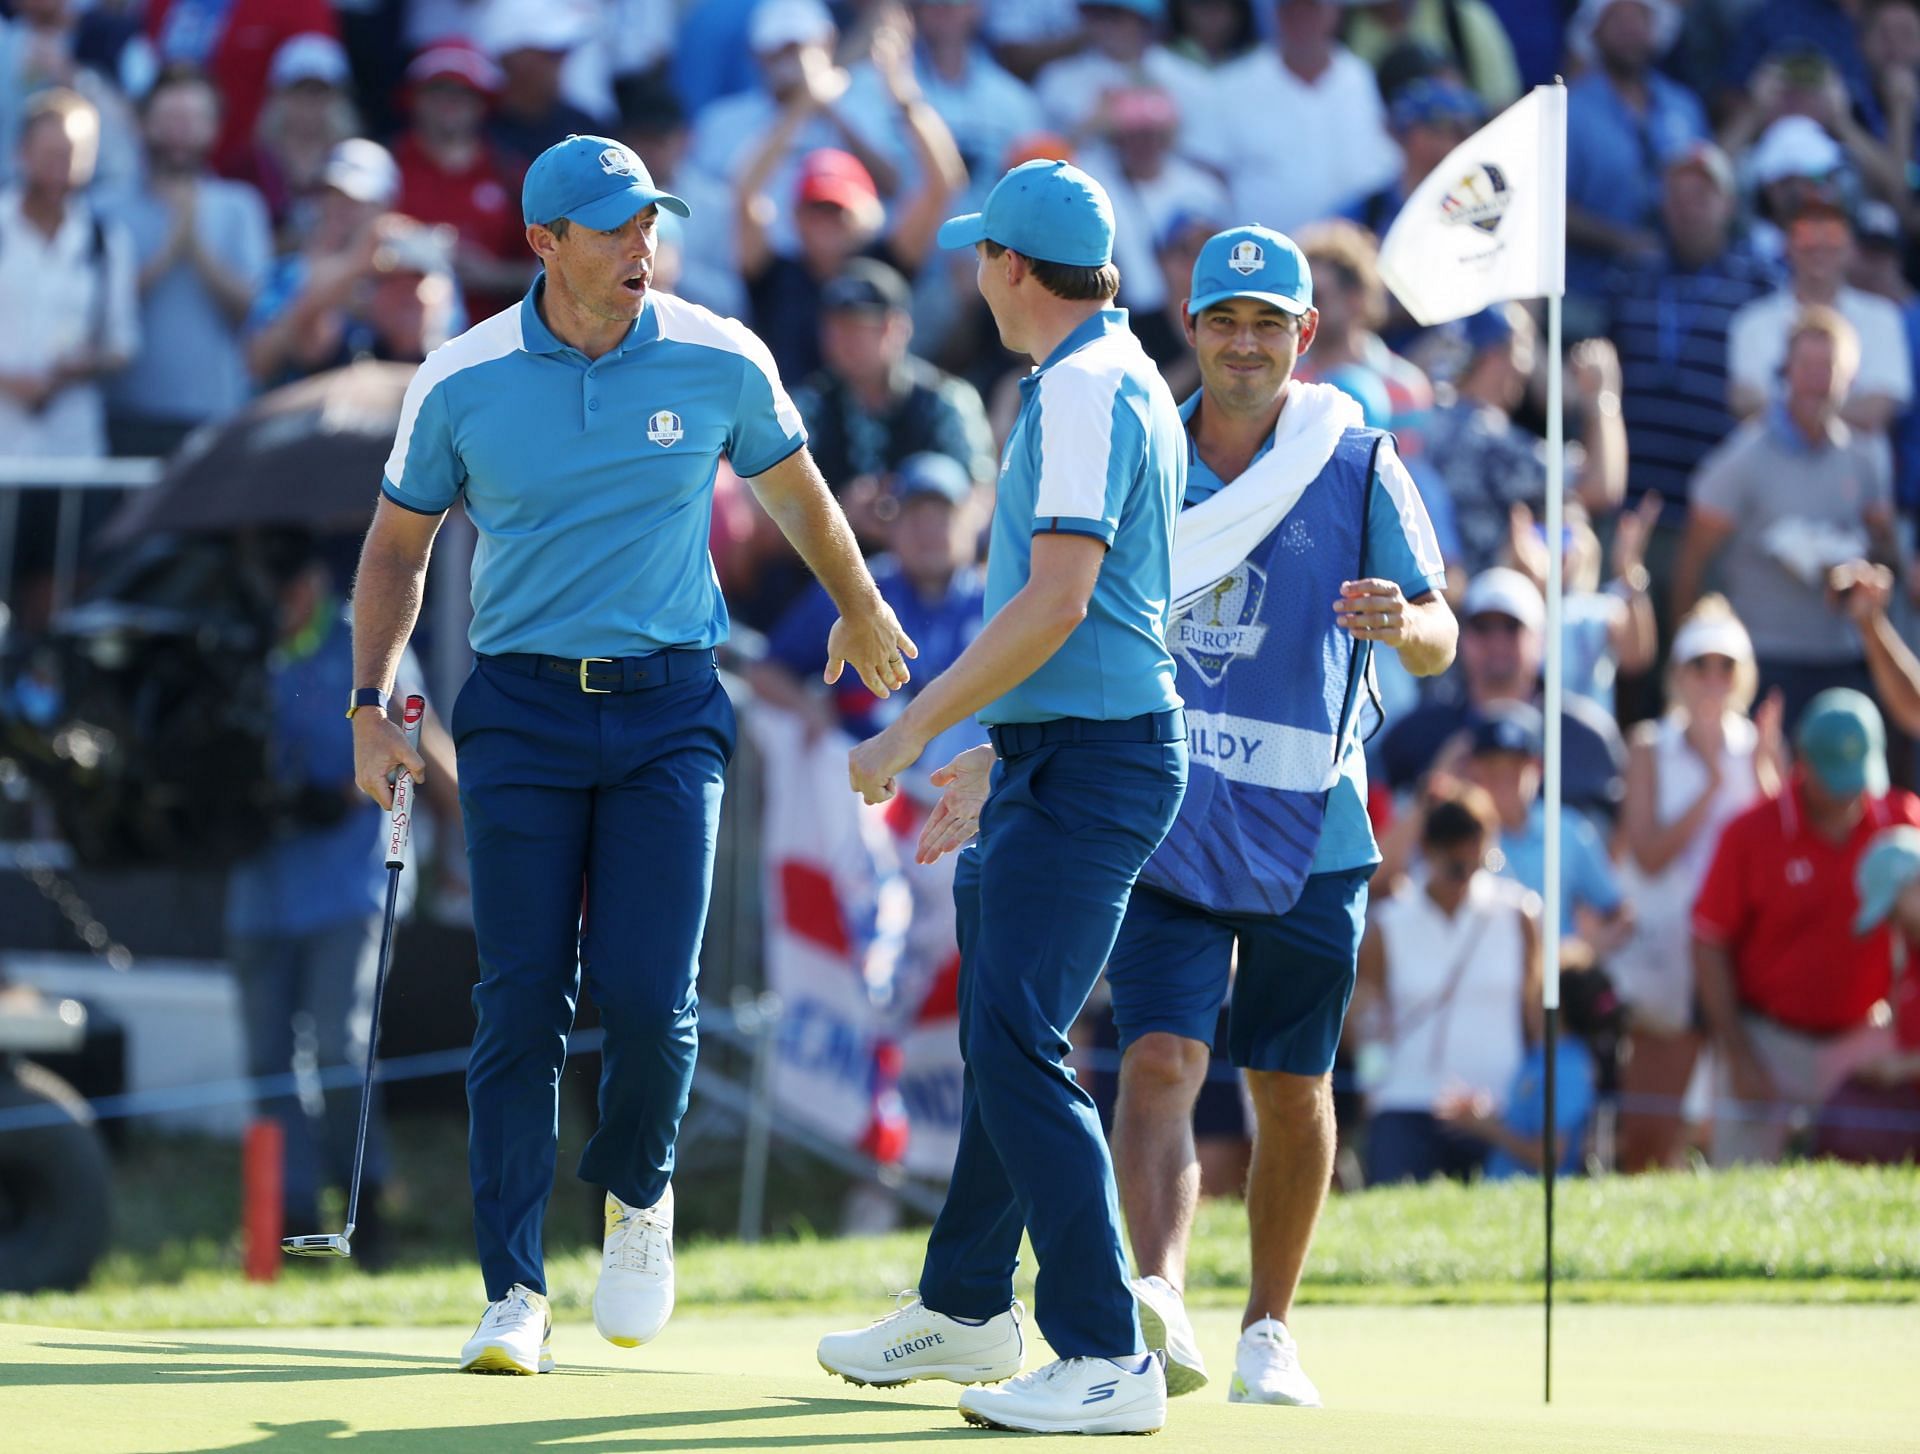 Rory McIlroy and Matt Fitzpatrick of Team Europe celebrate on the tenth green during the Friday afternoon fourball matches of the 2023 Ryder Cup (Image via Getty)